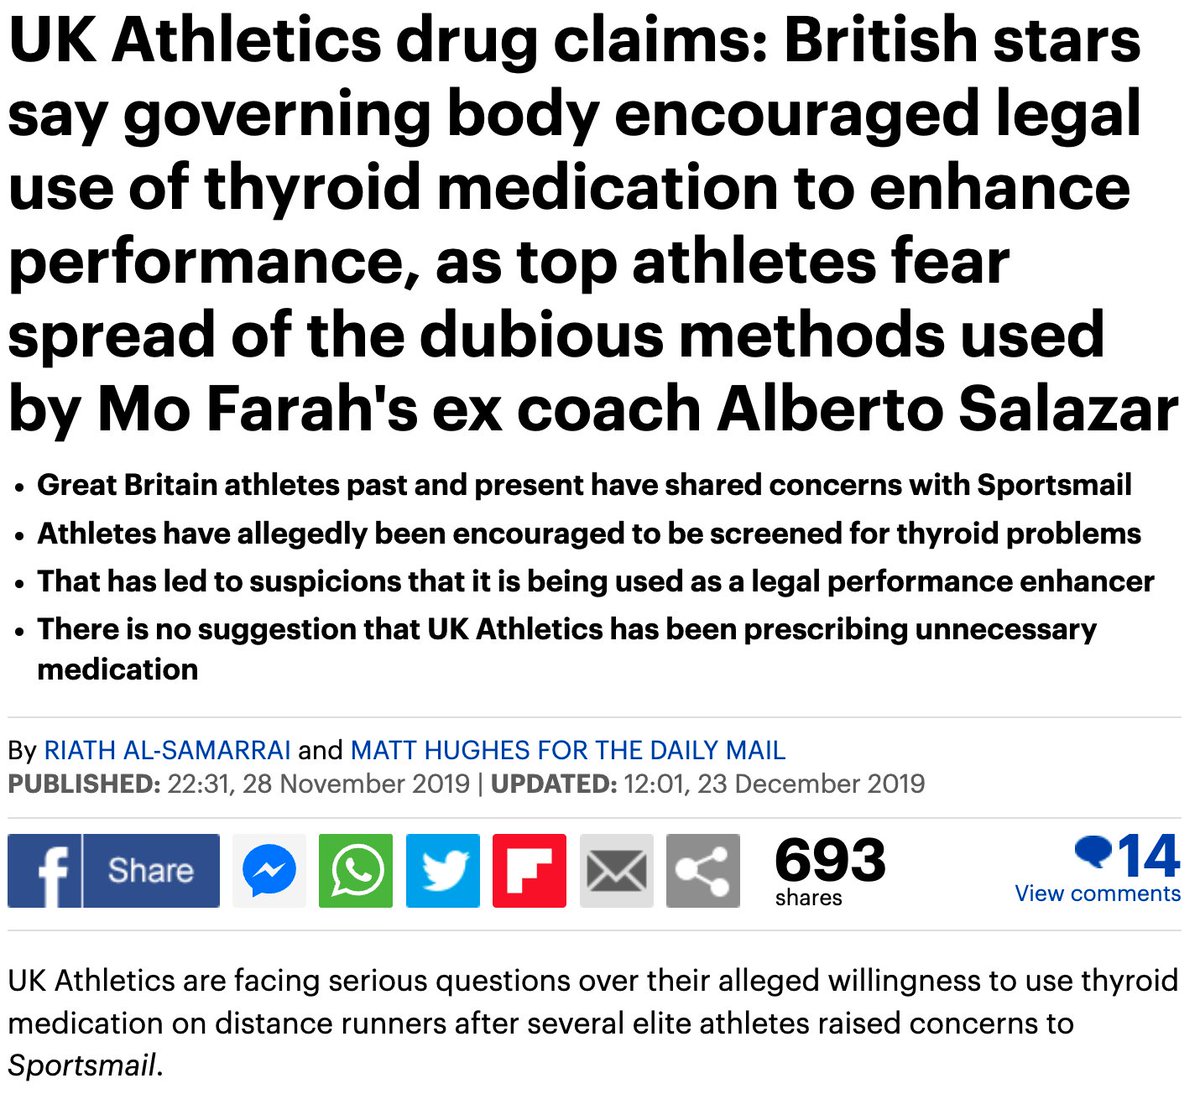 Q> What is the core of the furore over China's swimmers? A> Many suspect that the athletes were given a medication they didn't need by their federation to enhance performance. Let's not forget that UK Athletics did the same ten years ago with Thyroxine.